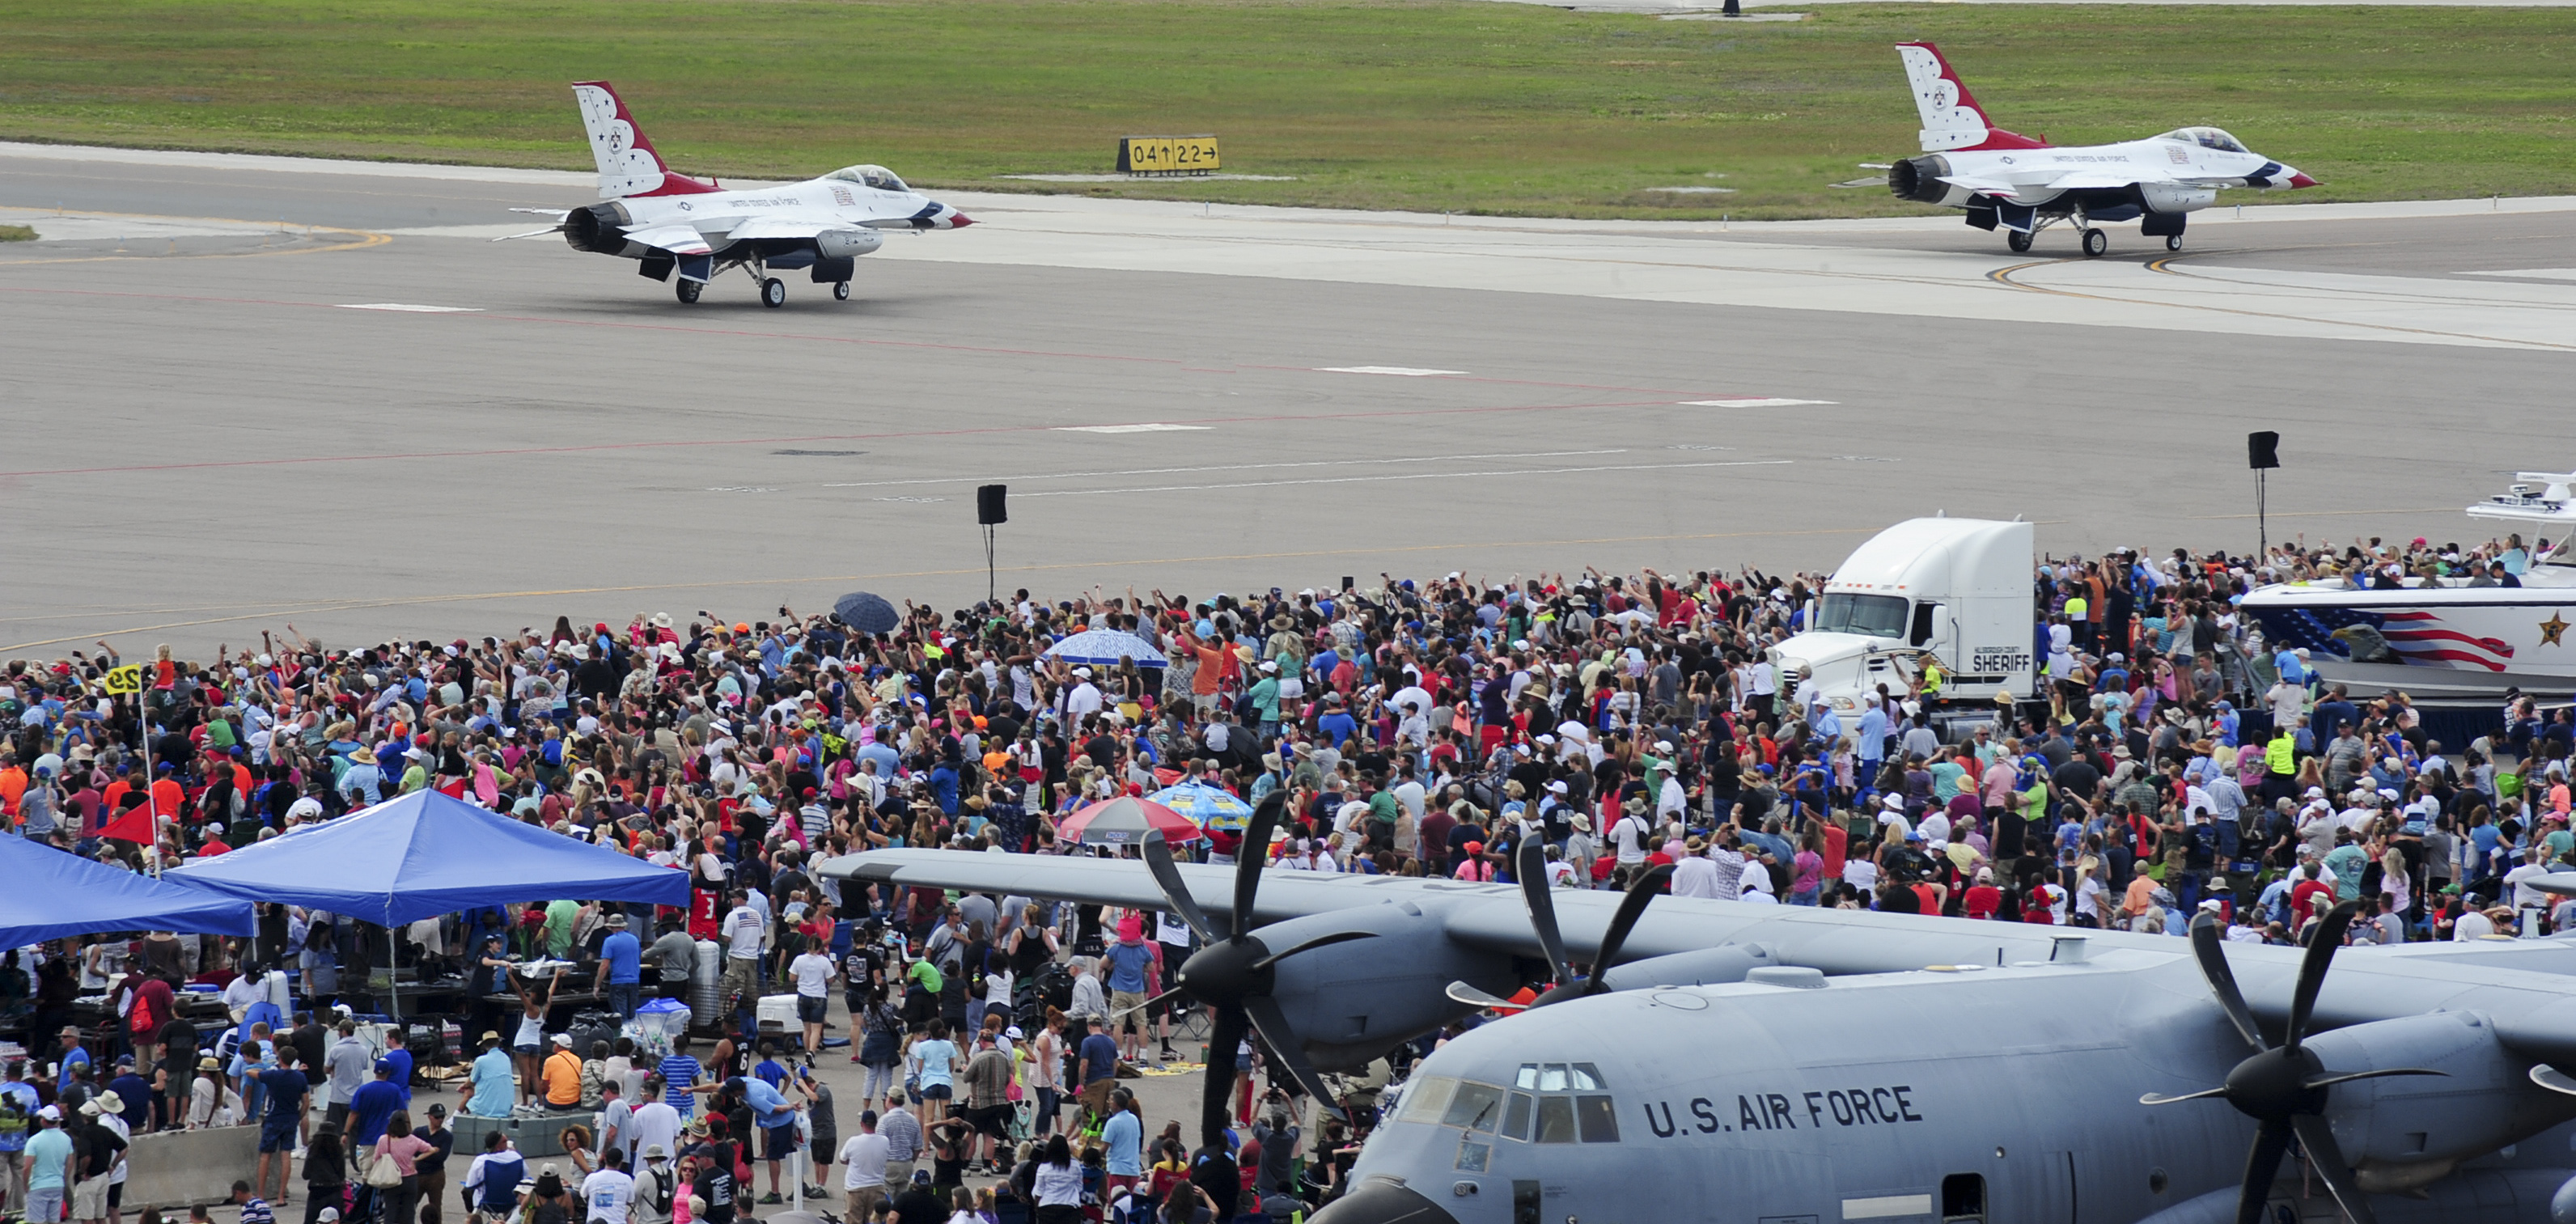 MacDill delivers 'amazing' AirFest 2016 experience > MacDill Air Force